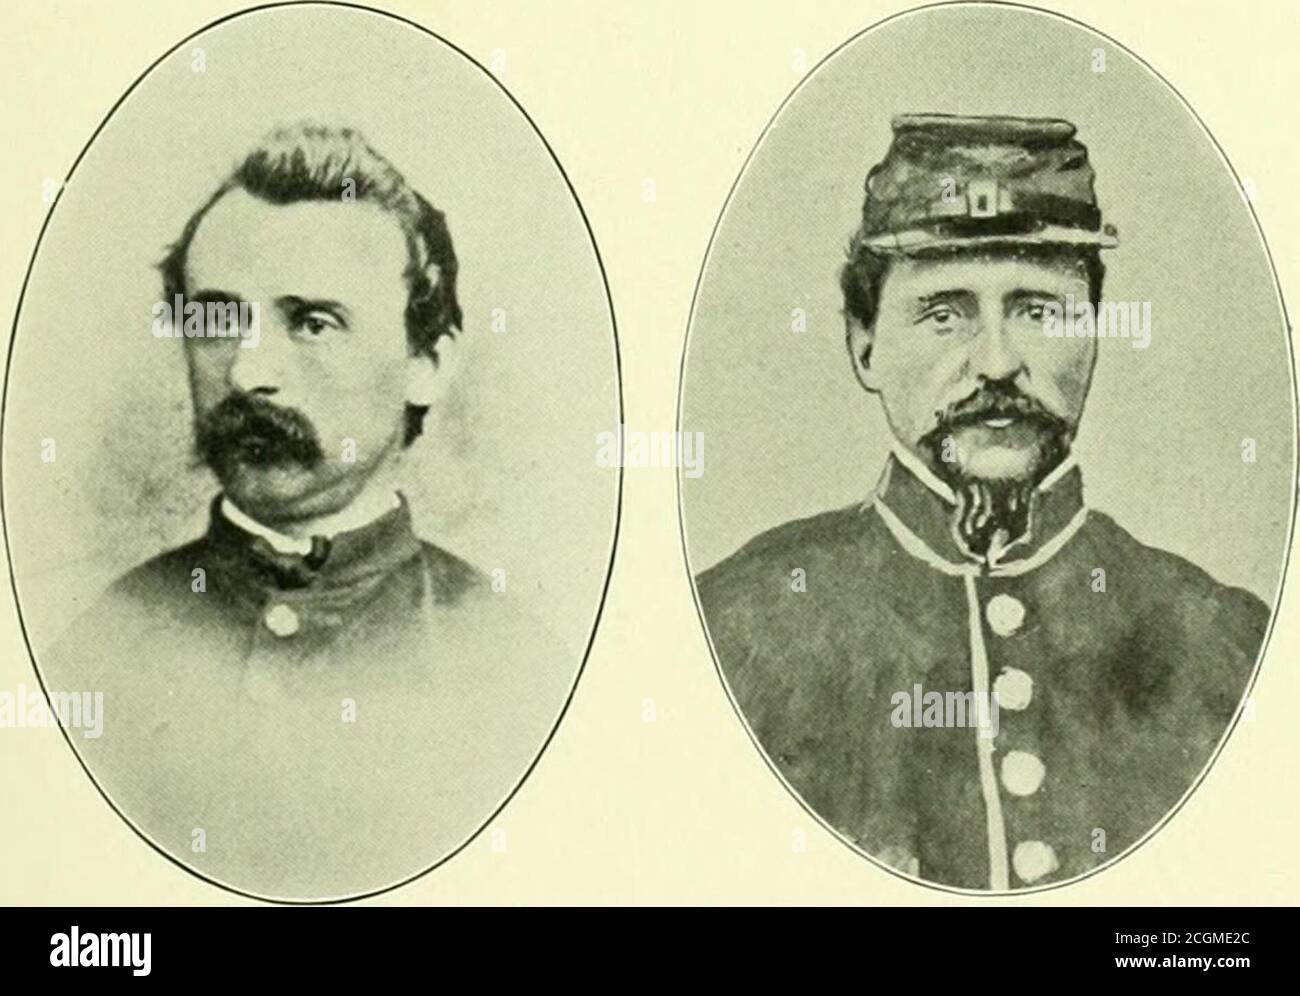 . Historic days in Cumberland County, New Jersey, 1855-1865 : political and war time reminiscences . WAR TIME PICTURES—lMU-lS(;-&gt;Officers Cumberland Greys. Company F. Third New Jersey Regirrent Inf. Vols. Major James W. H. Stickney iFirst Capt. iLieut. Samuel T. DuBois (35) Capt. Charles F. SalkeldLieut. George Woodruff 36 HIST(.)RIC DAYS 18O2; Elias Blackson, died of wounds received in action atGaines farm, Va., June 27, 1862; Henry Clark, died inaction at Salem Heights, Va., May 3, 1863; Gideon W.Johnson, killed in action at Gaines farm, Va., June 27.1862: Thomas B. Keen, killed in action Stock Photo